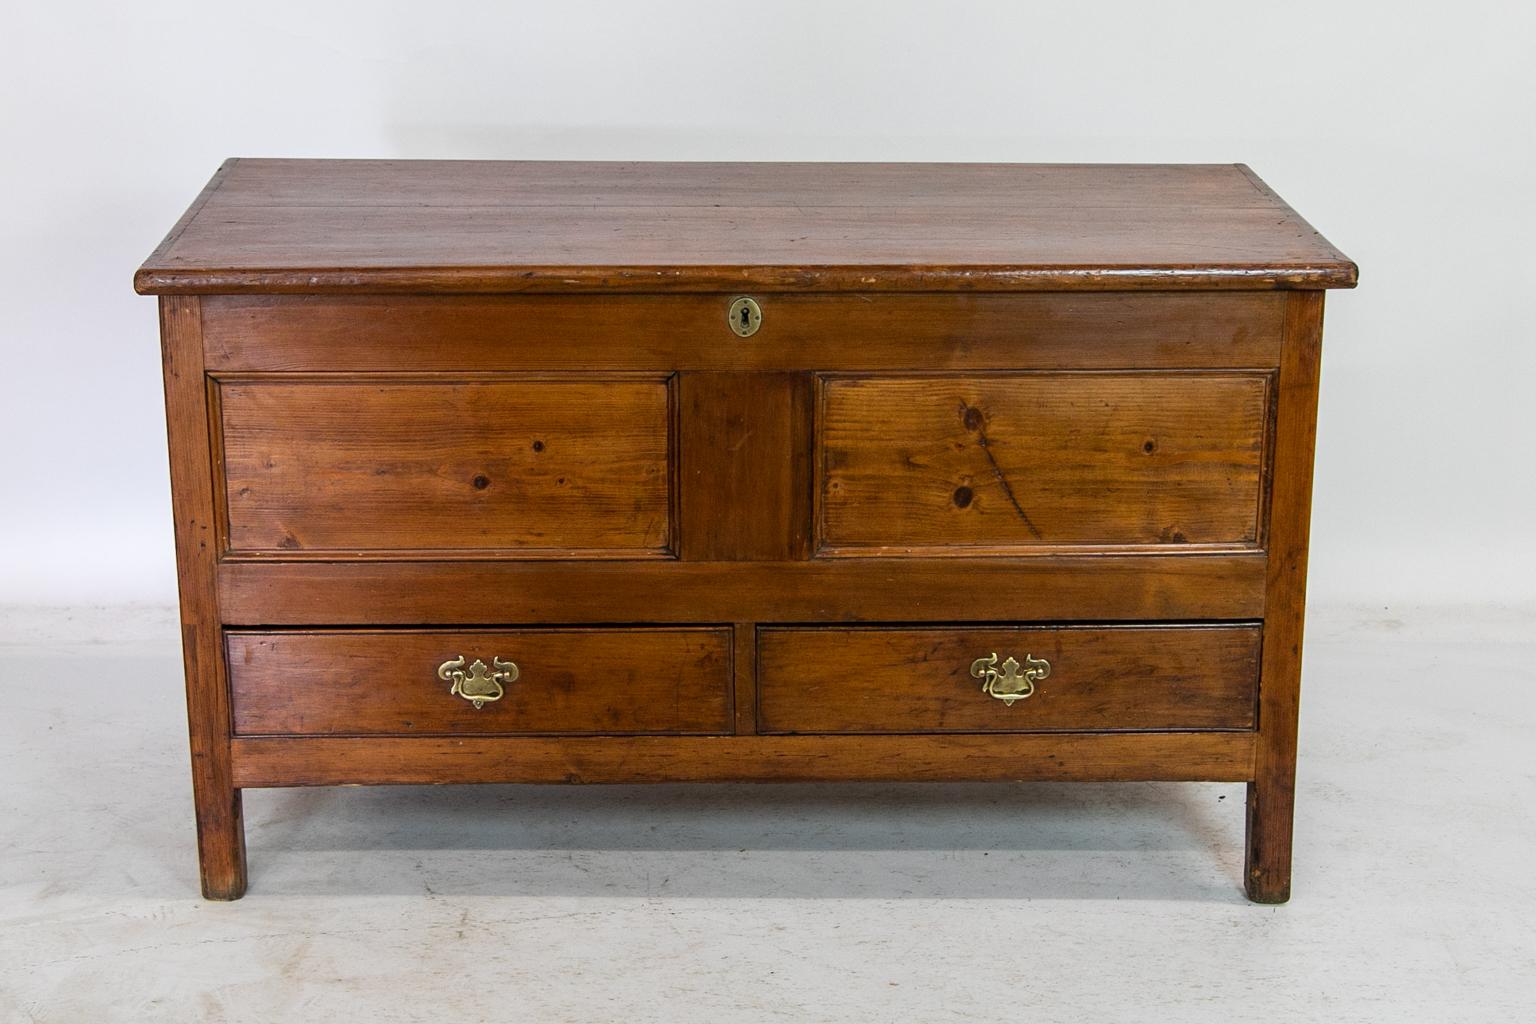 This pine blanket chest has a bullnose top molding and recessed molded panels on the front and sides. The two drawers have incised cockbeaded edges. The interior retains its two large 